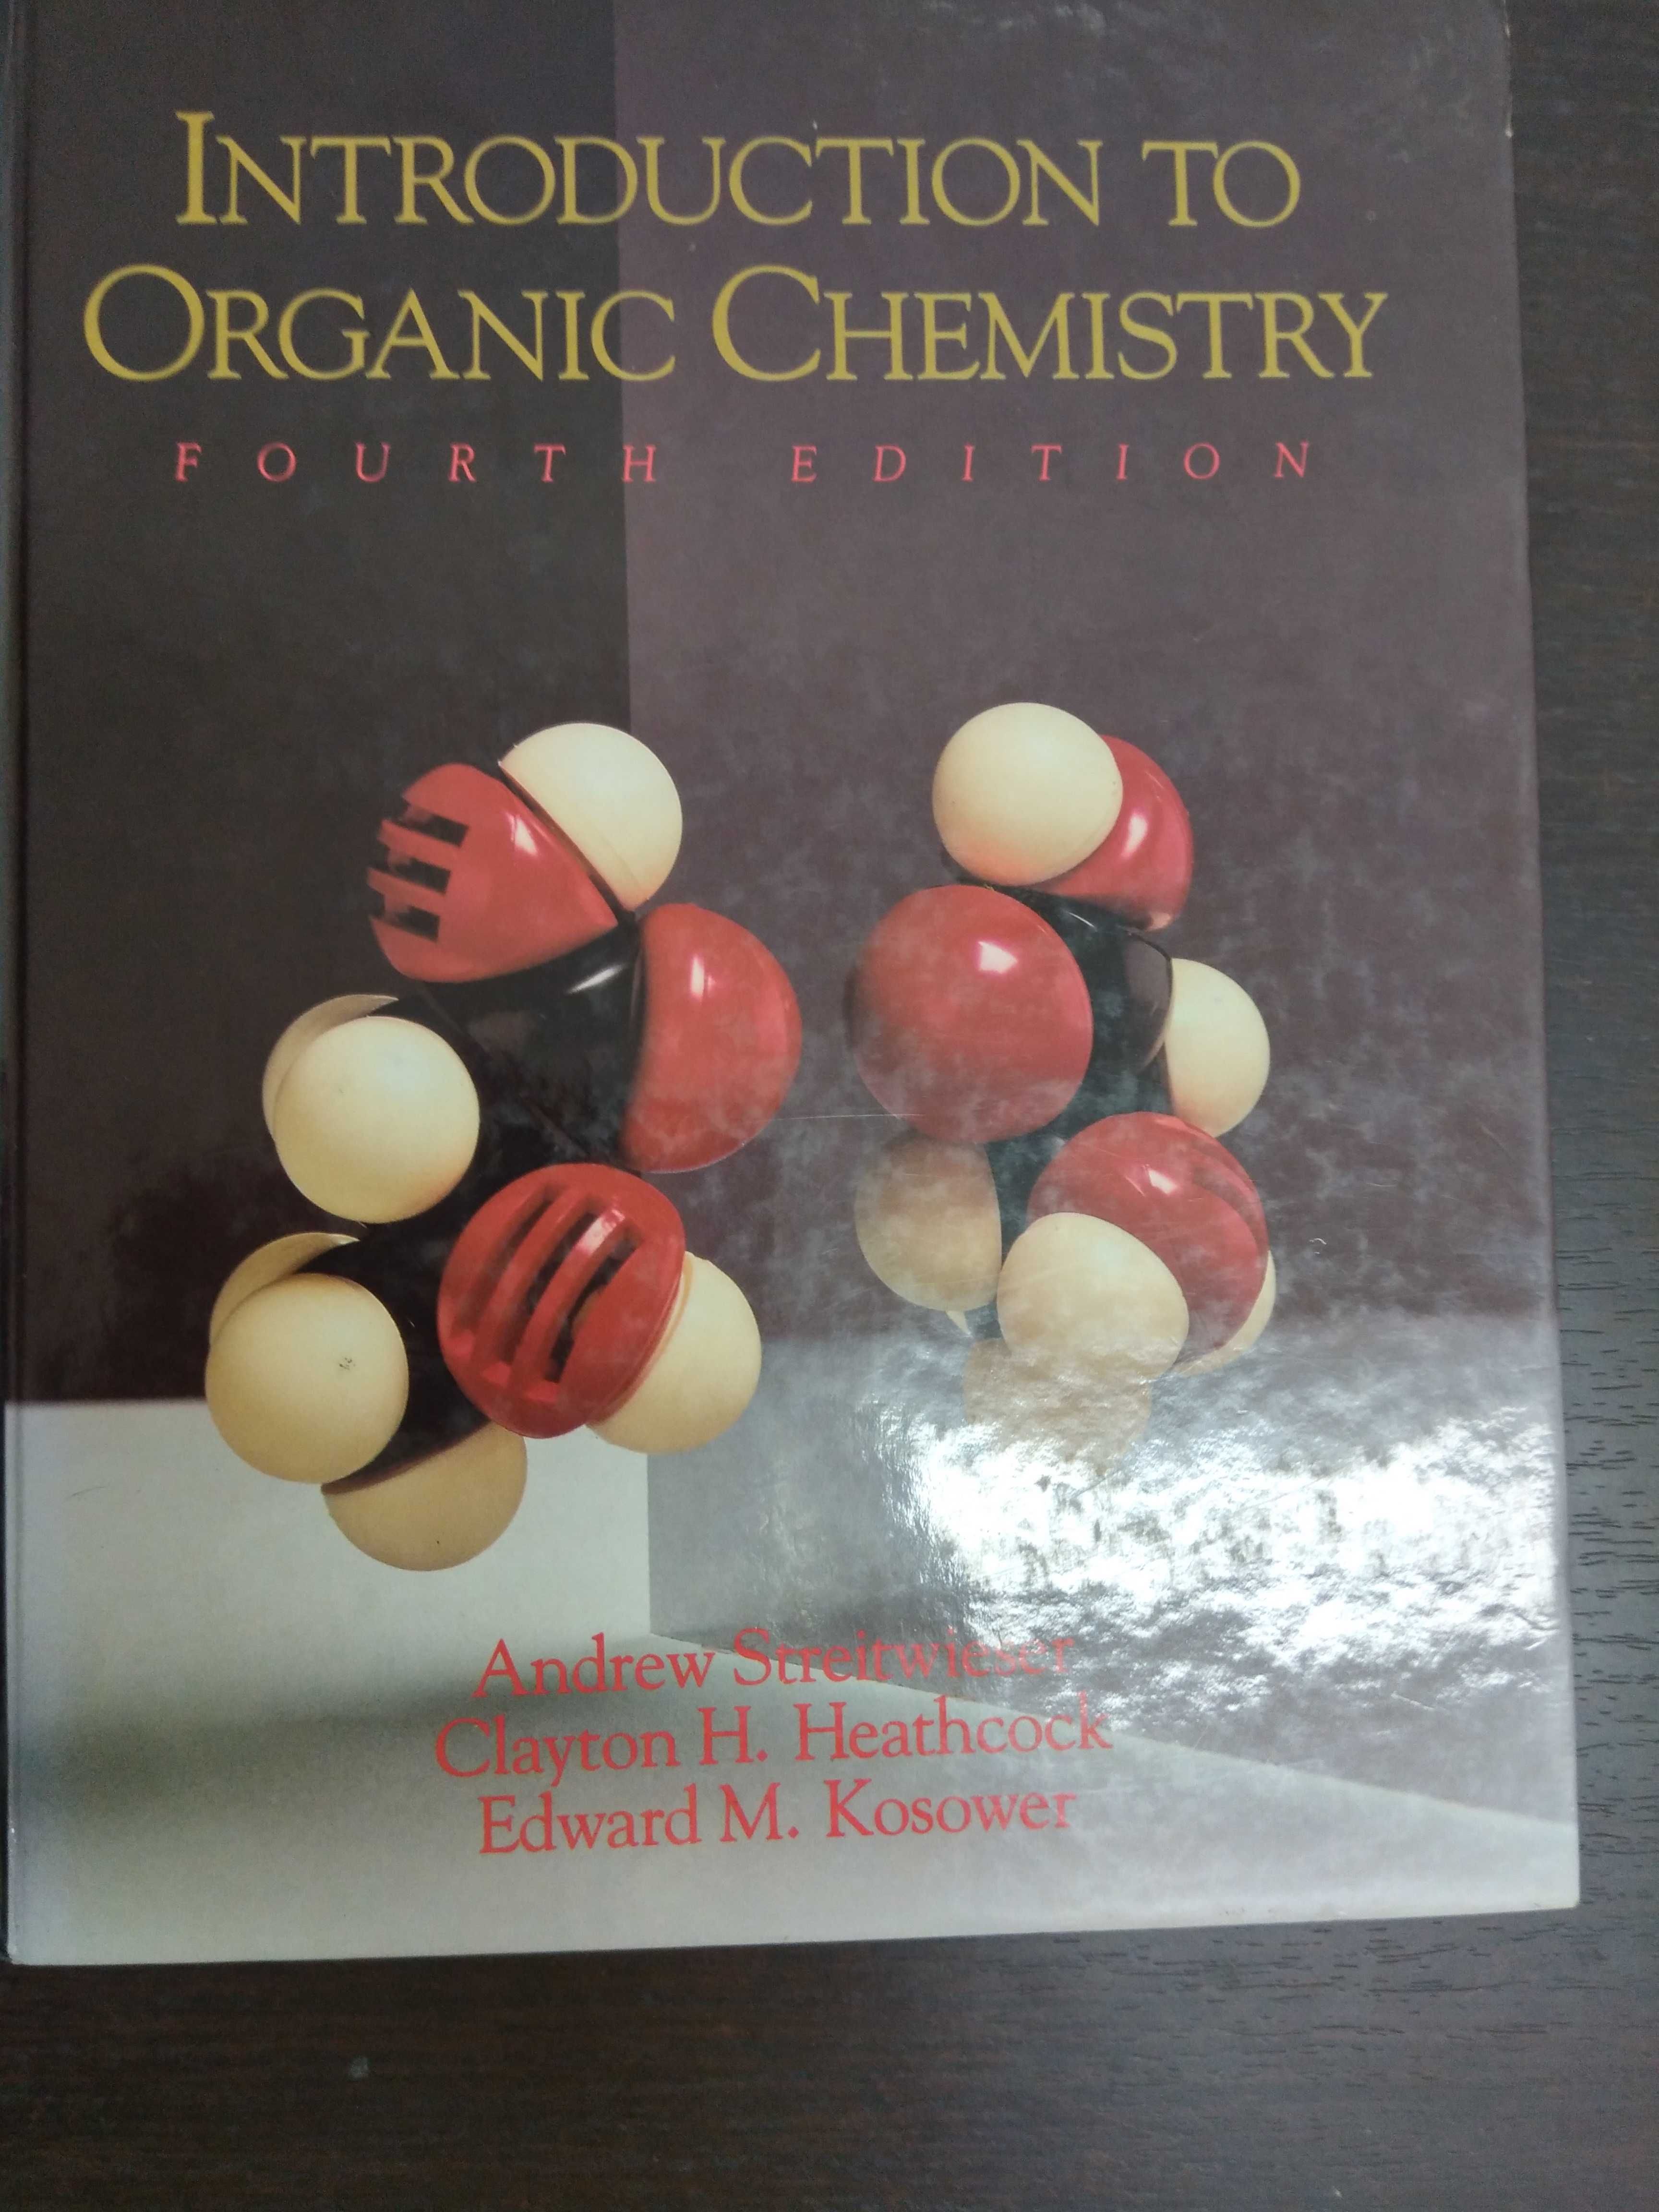 Introduction to organic chemistry - 4th edition